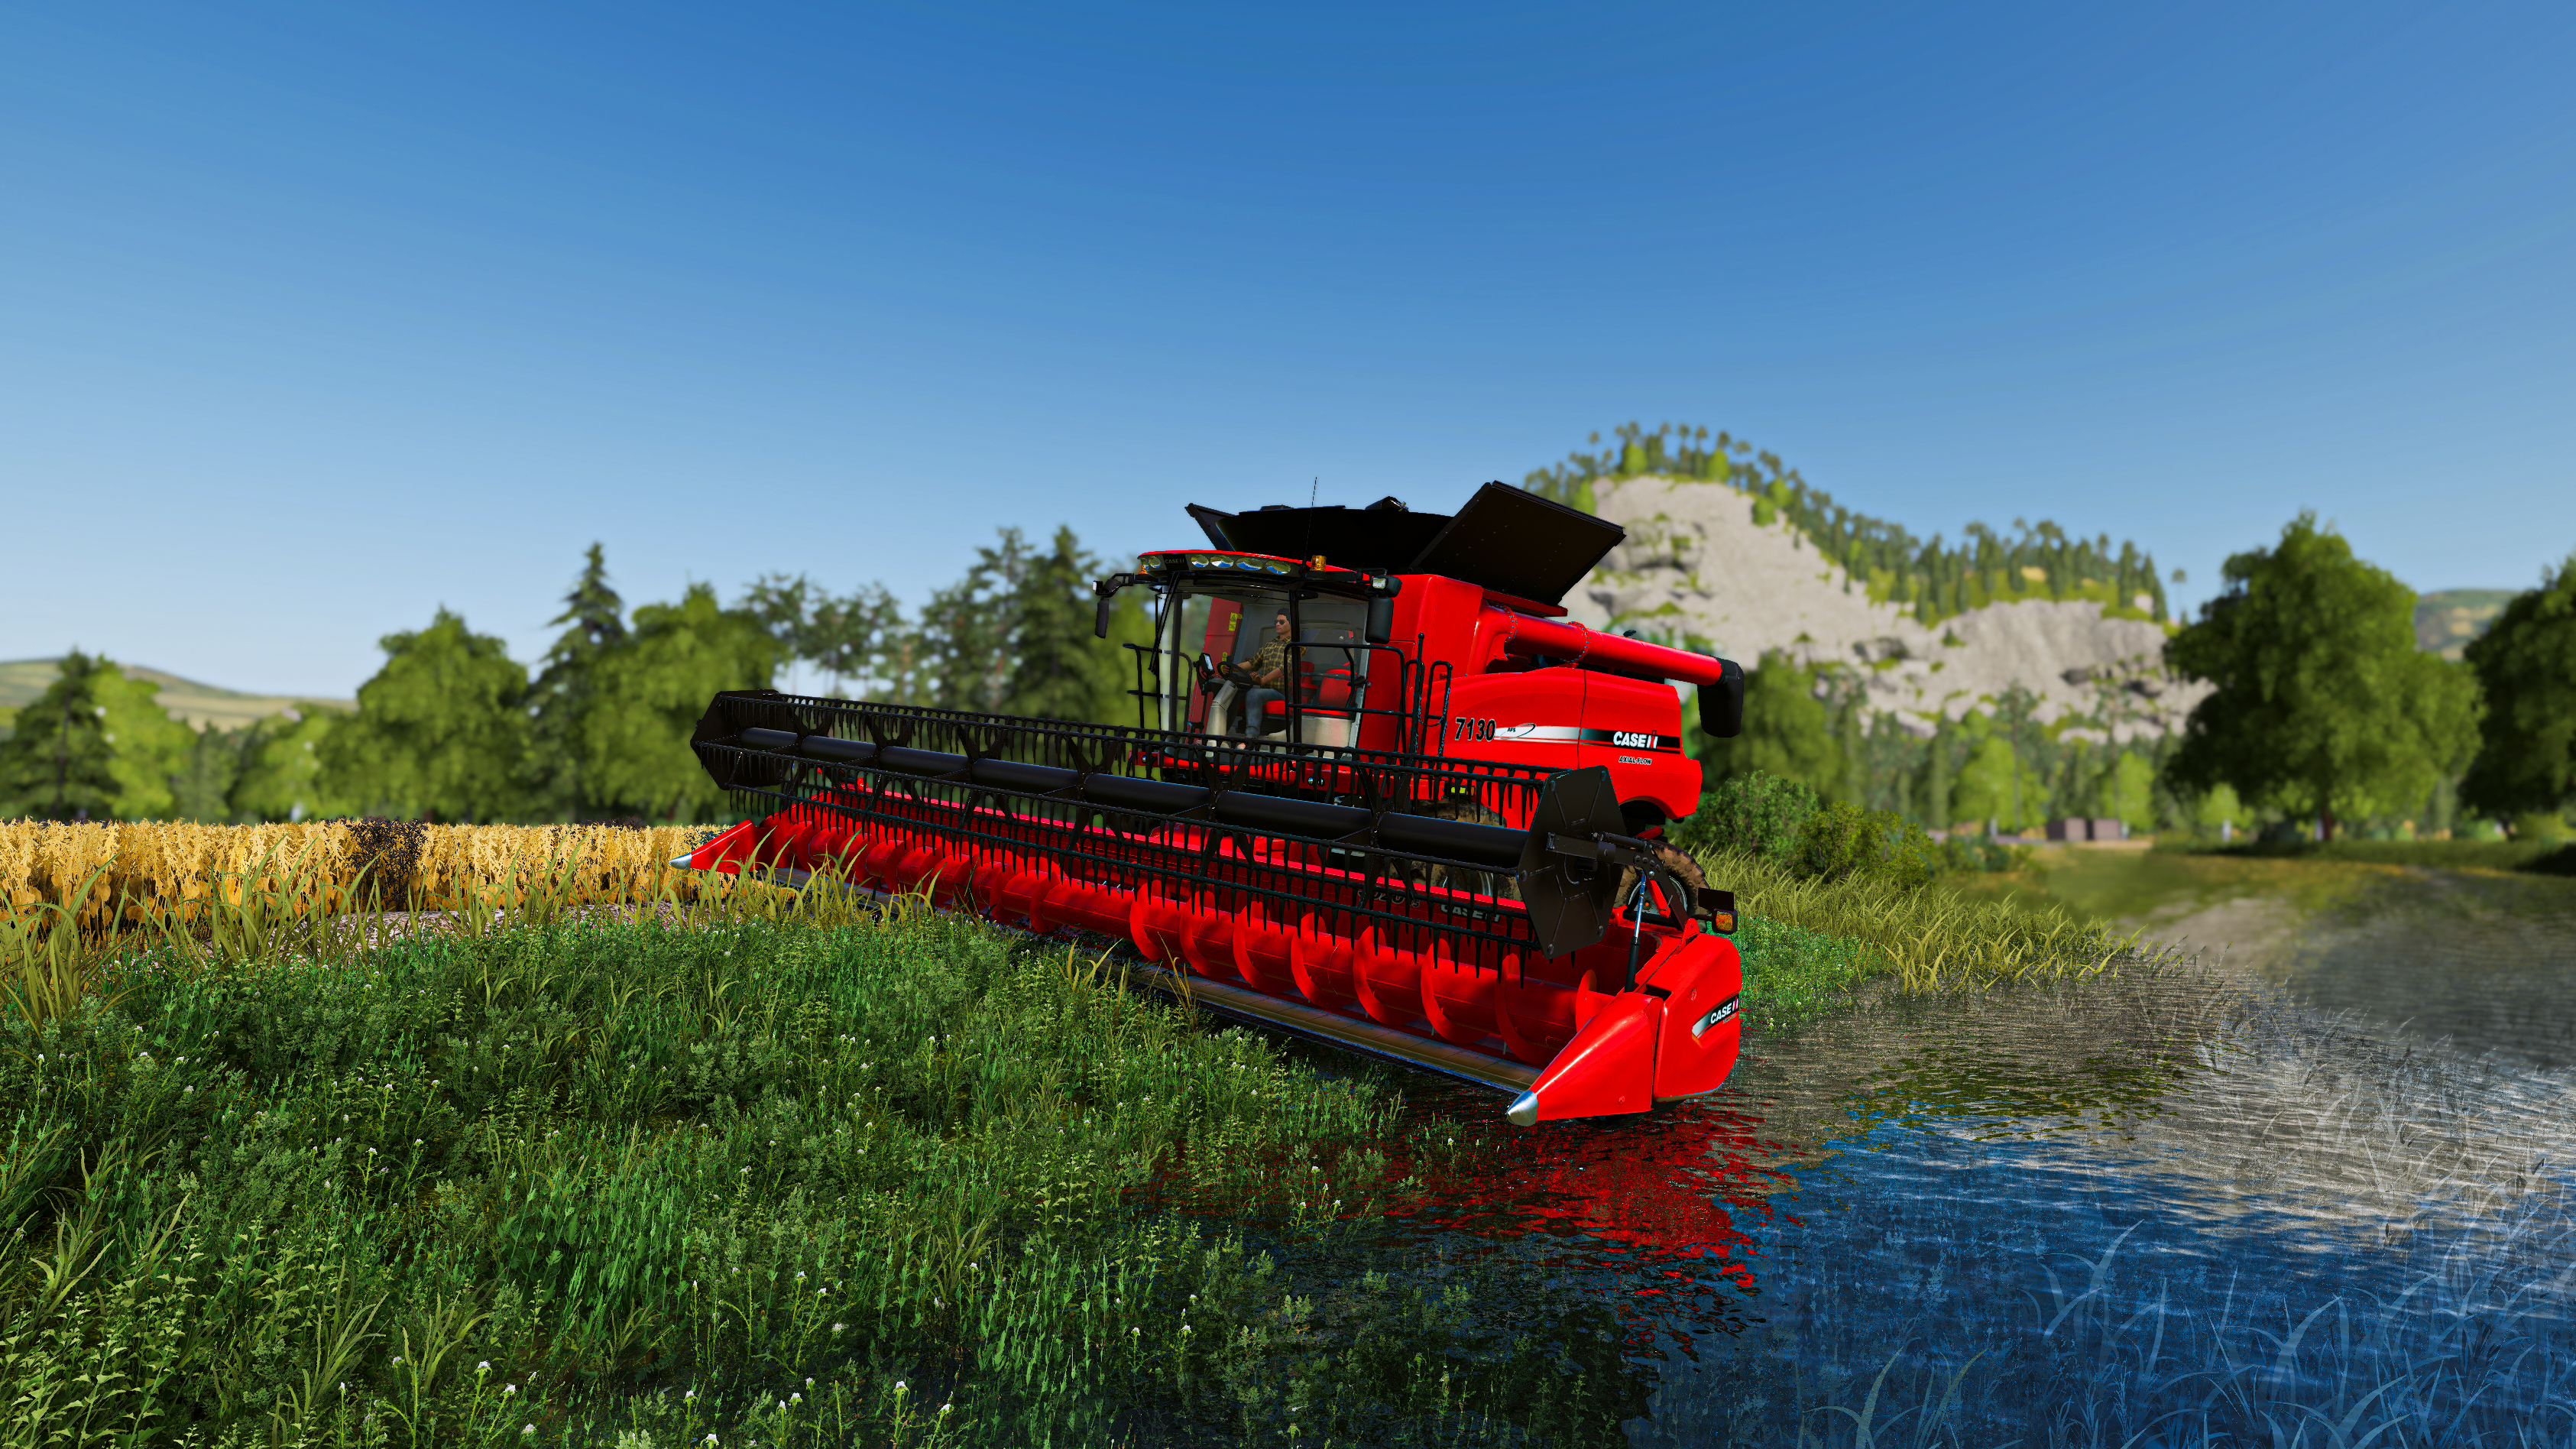 Farming Farming Simulator Farming Simulator 2019 Farm Flowers Trees Water Sky Blue Green Grass Fores 3371x1896